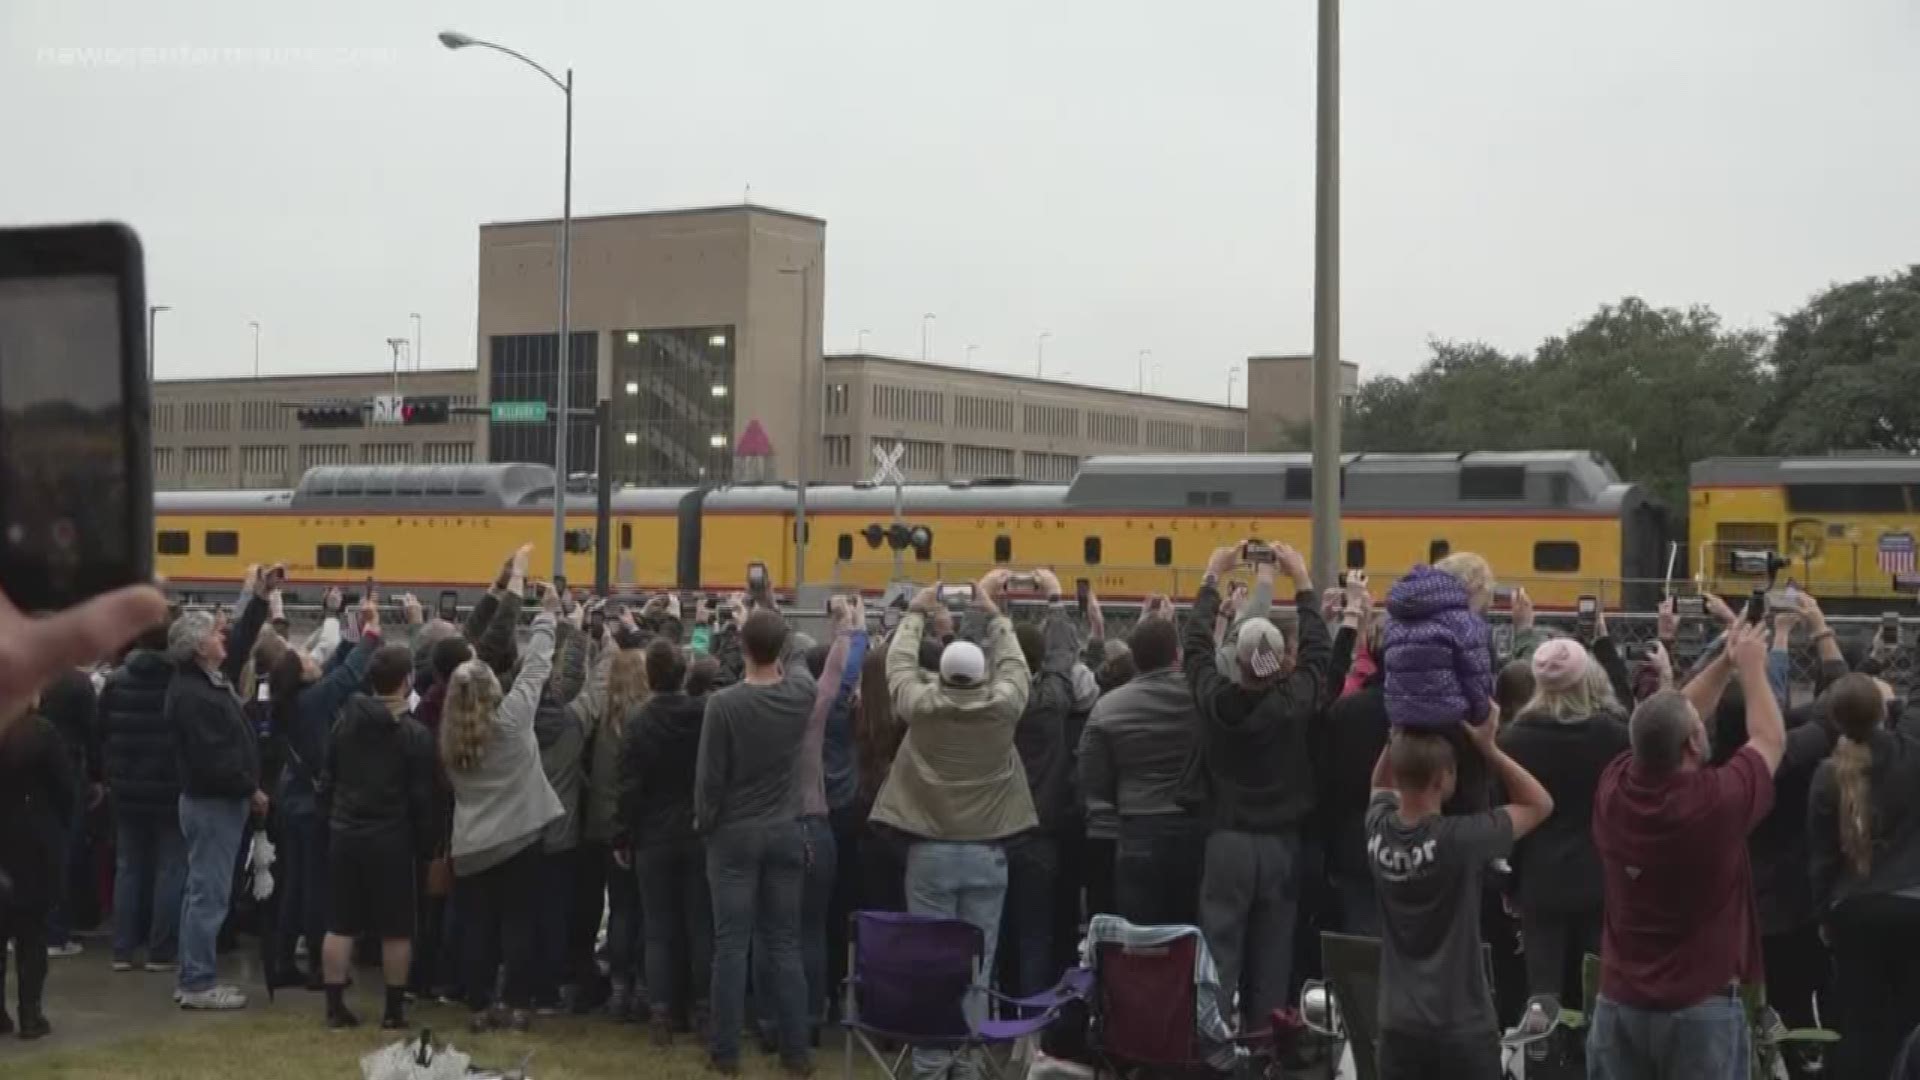 Thousands lined up to see the President and Family arrive in College Station, TX